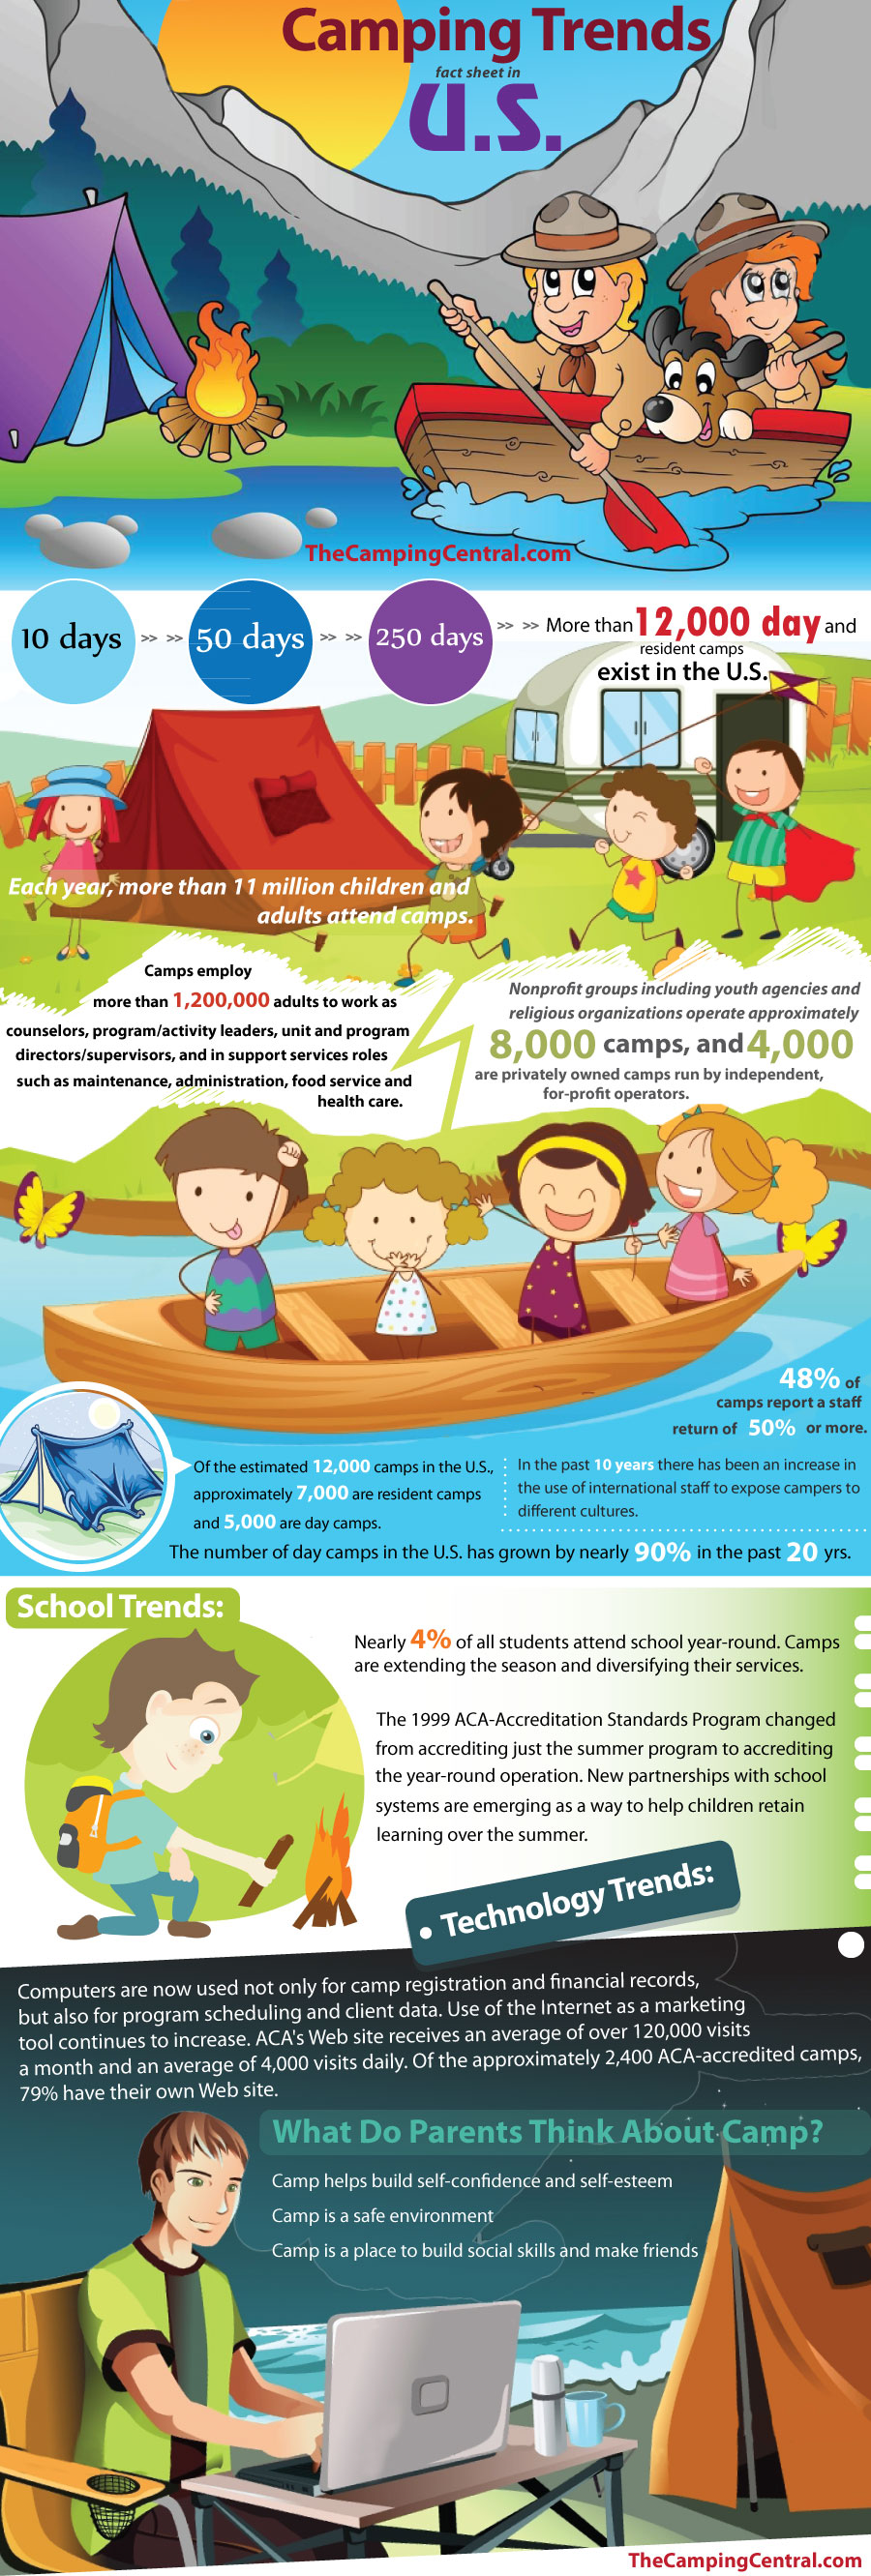 Camping Trends Fact Sheet in the U.S.